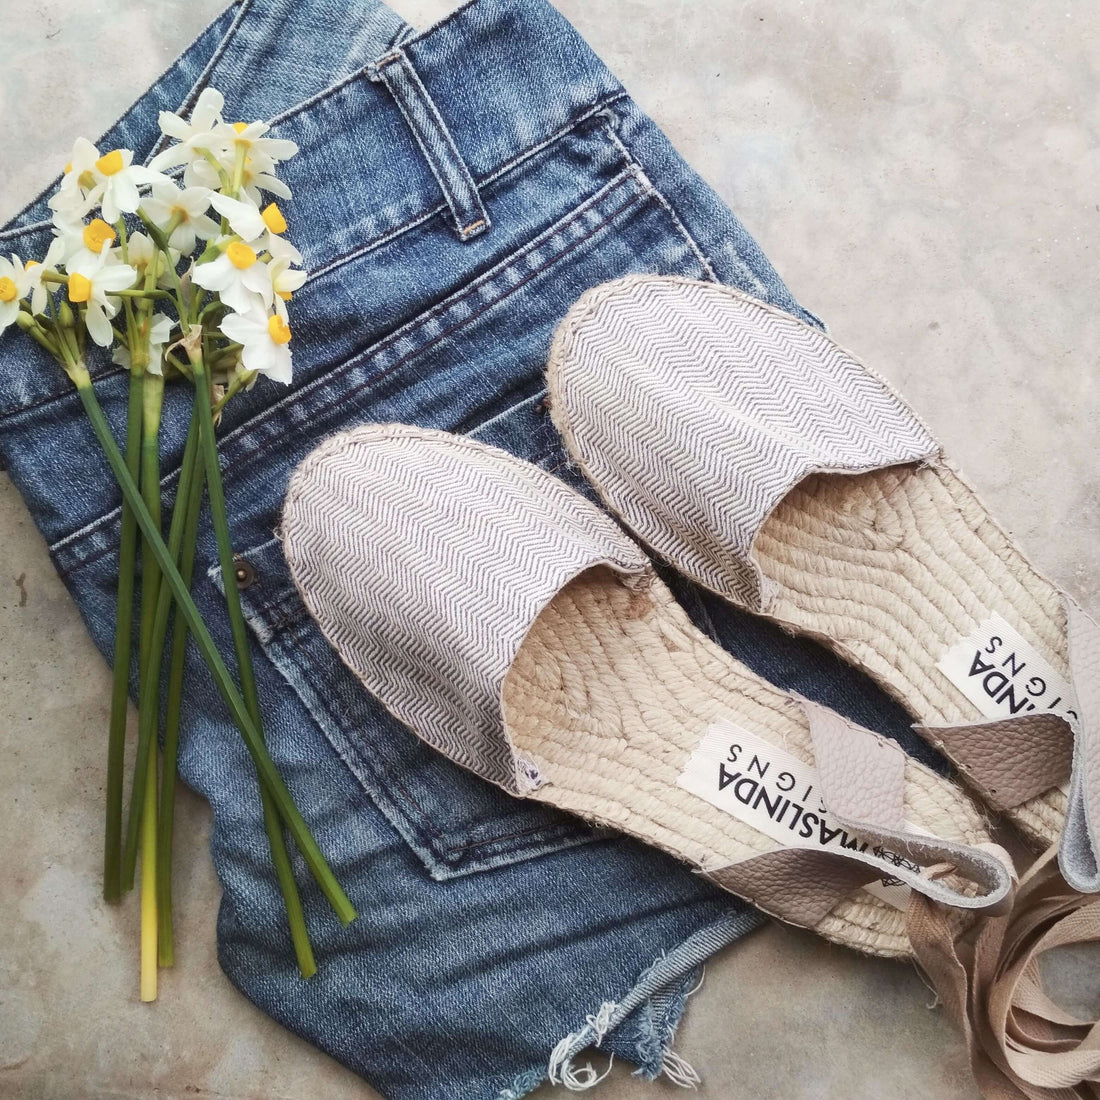 Espadrilles and Jeans: Mastering Casual Chic